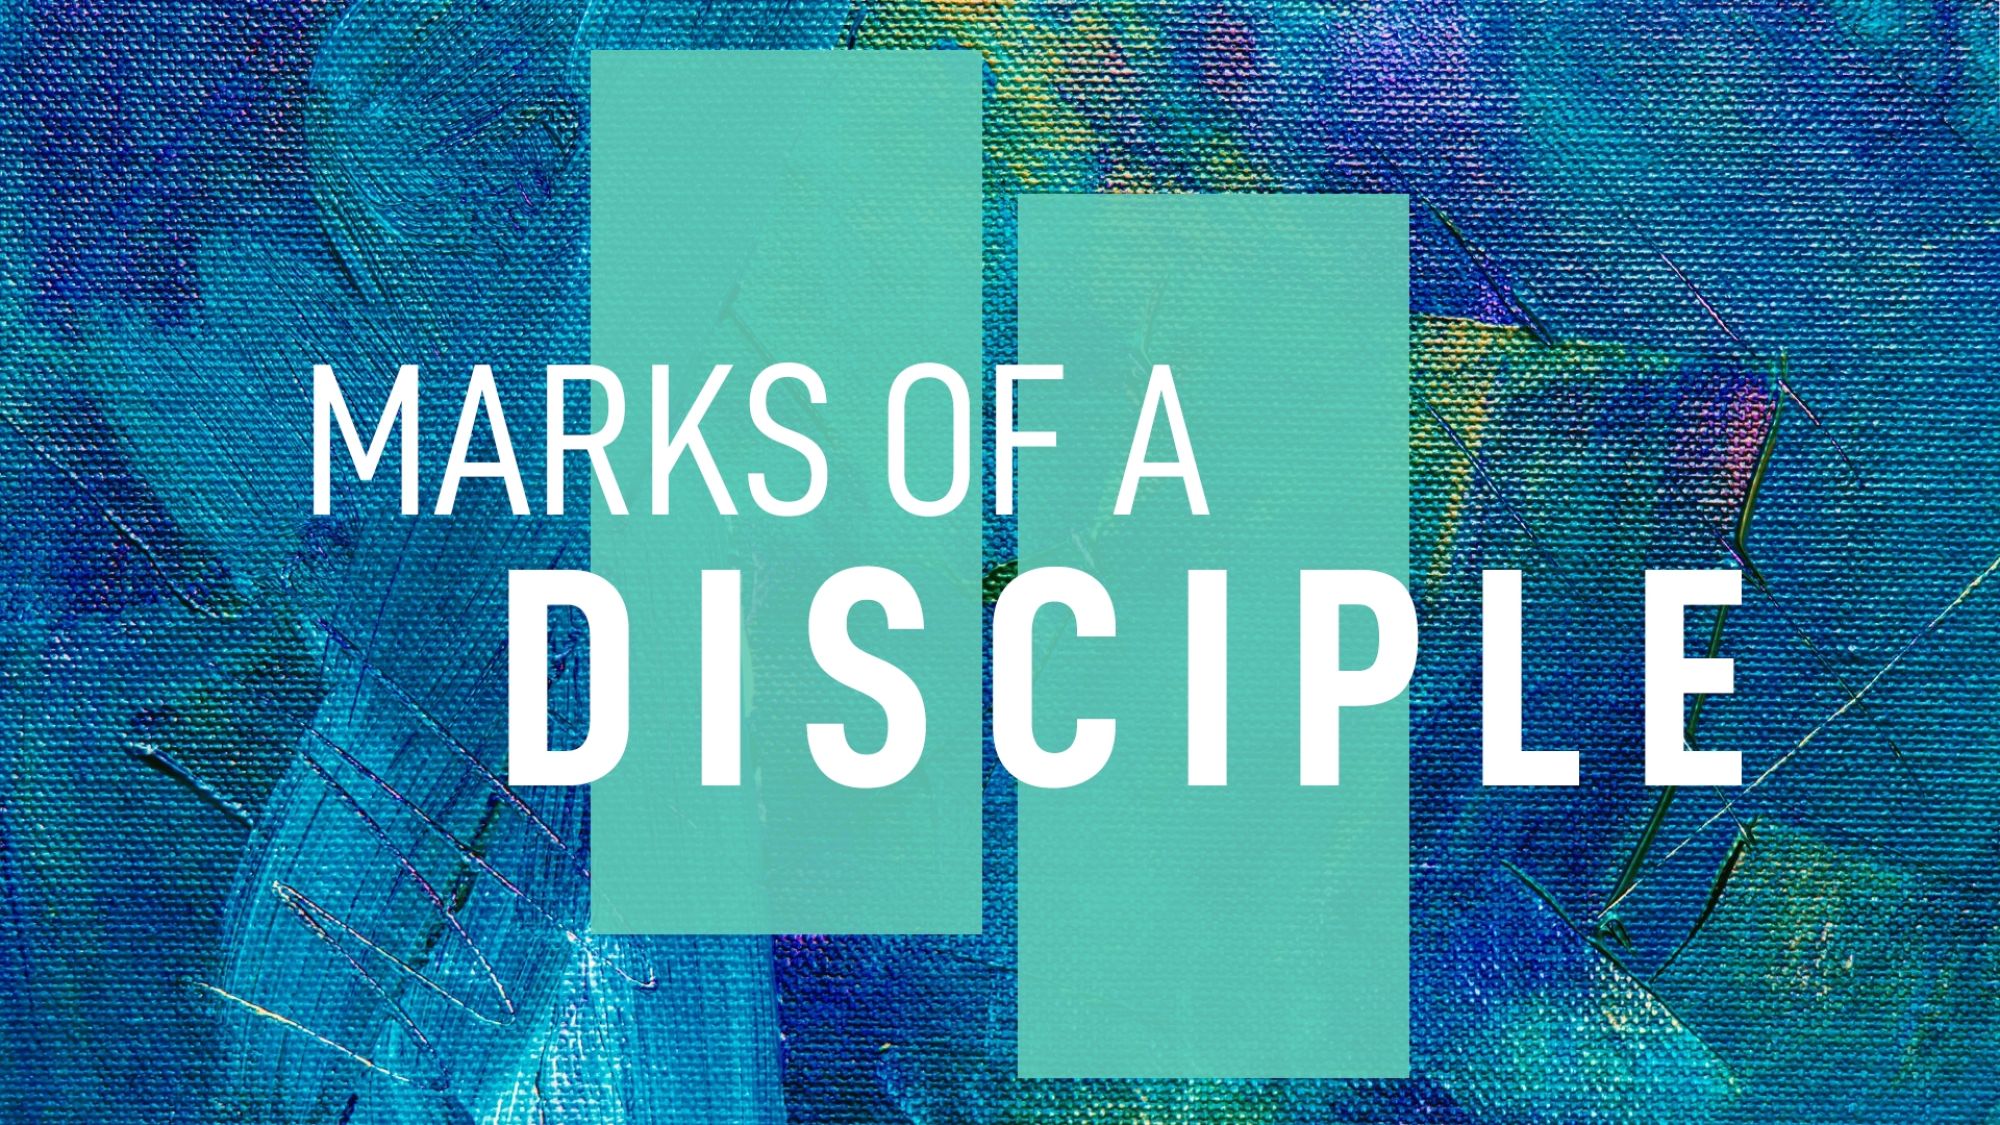 Marks of a Disciple